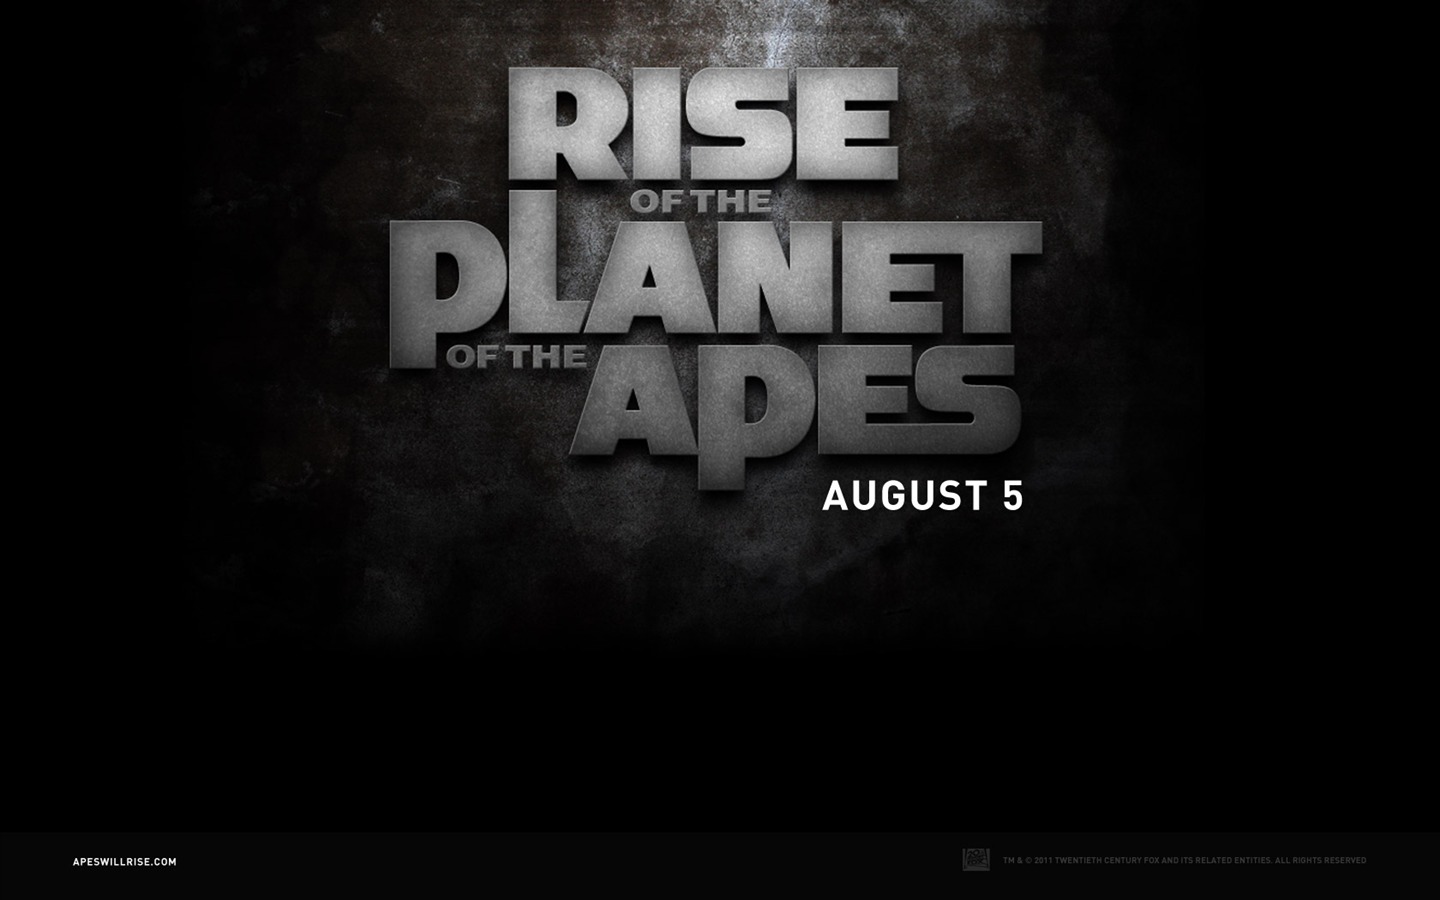 Rise of the Planet of the Apes 猿族崛起壁紙專輯 #7 - 1440x900